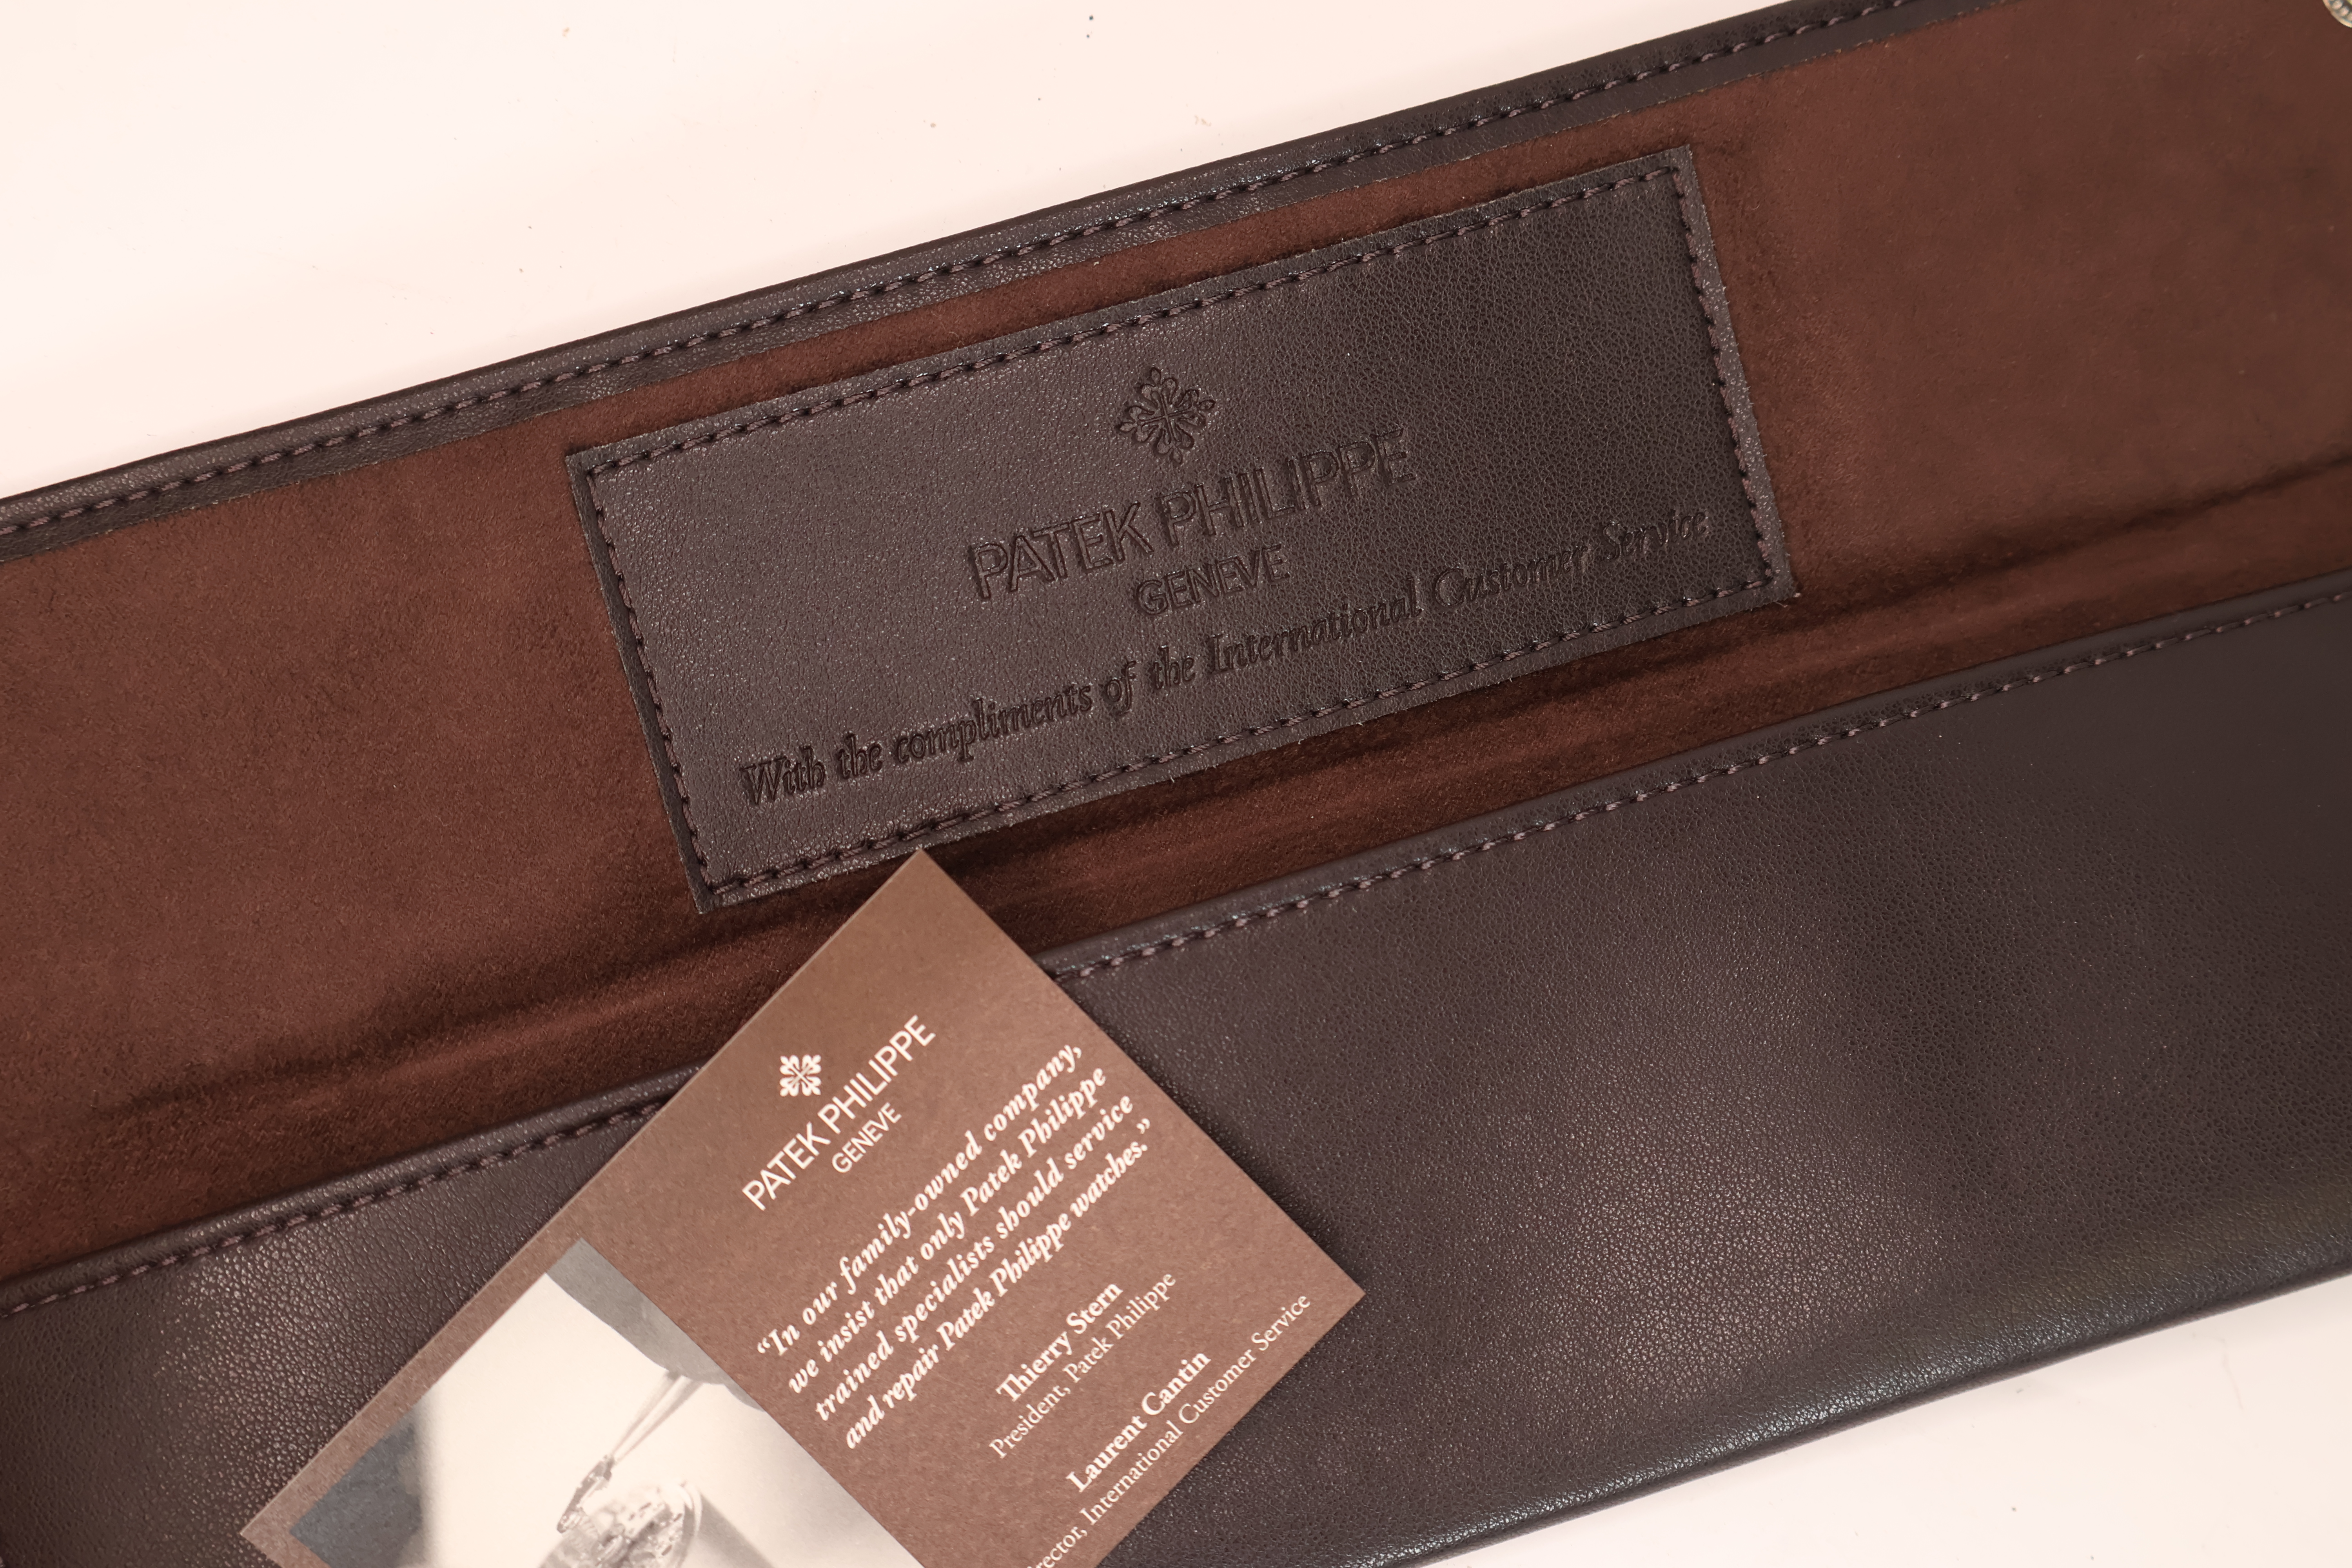 *To Be Sold Without Reserve* Patek Philippe leather watch pouch - Image 2 of 2